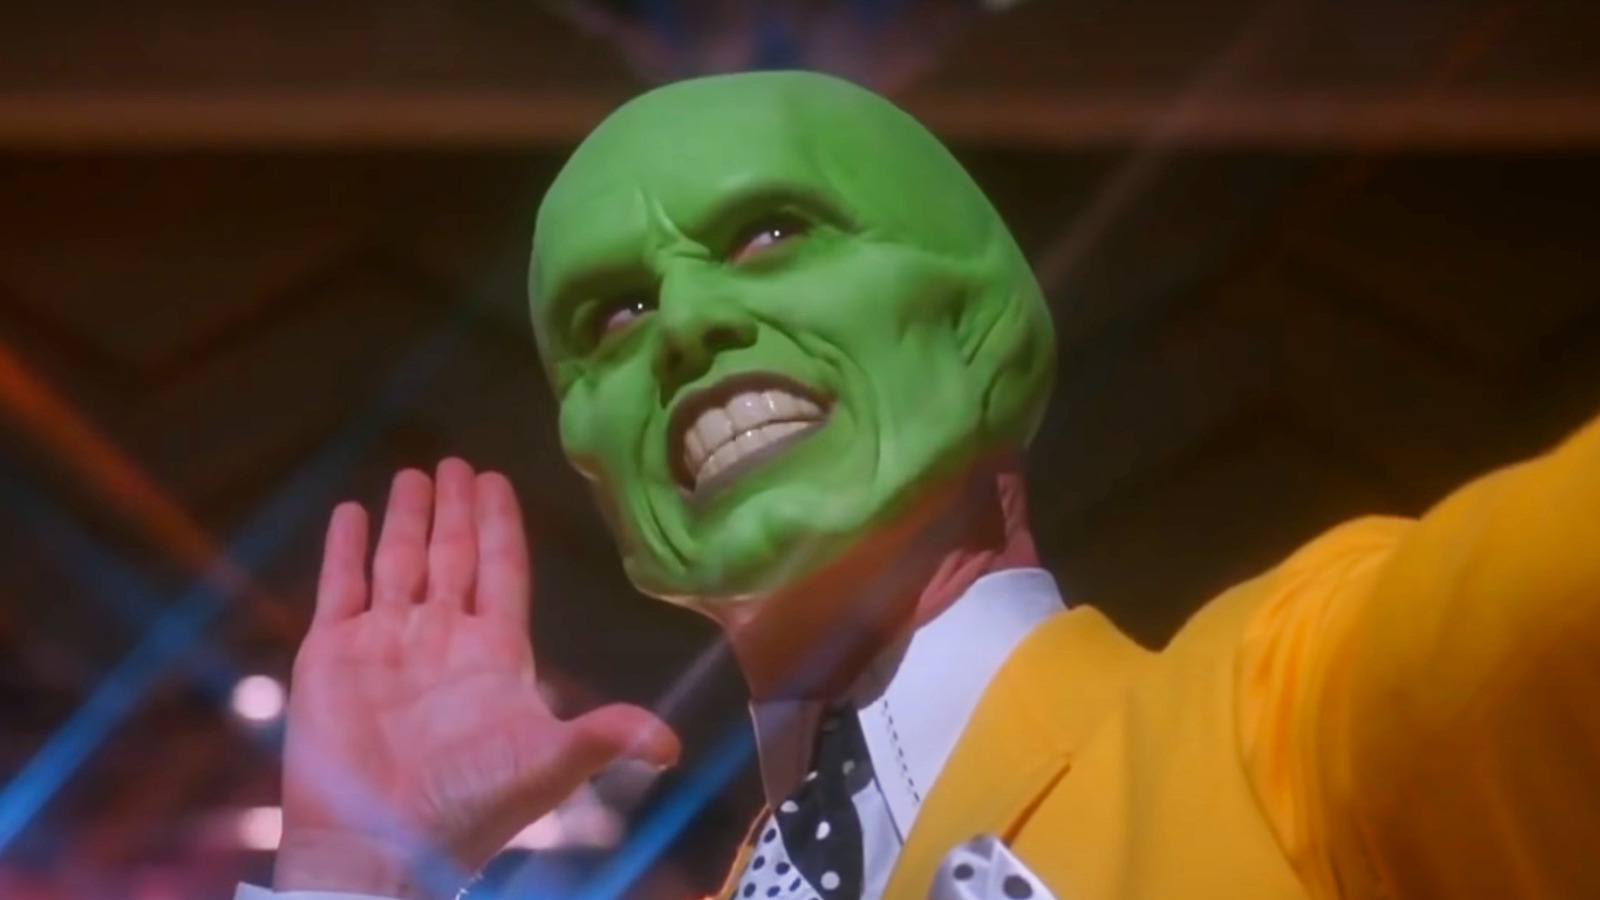 How The Mask To Transform Jim Carrey Without Hiding His Unmistakable Face